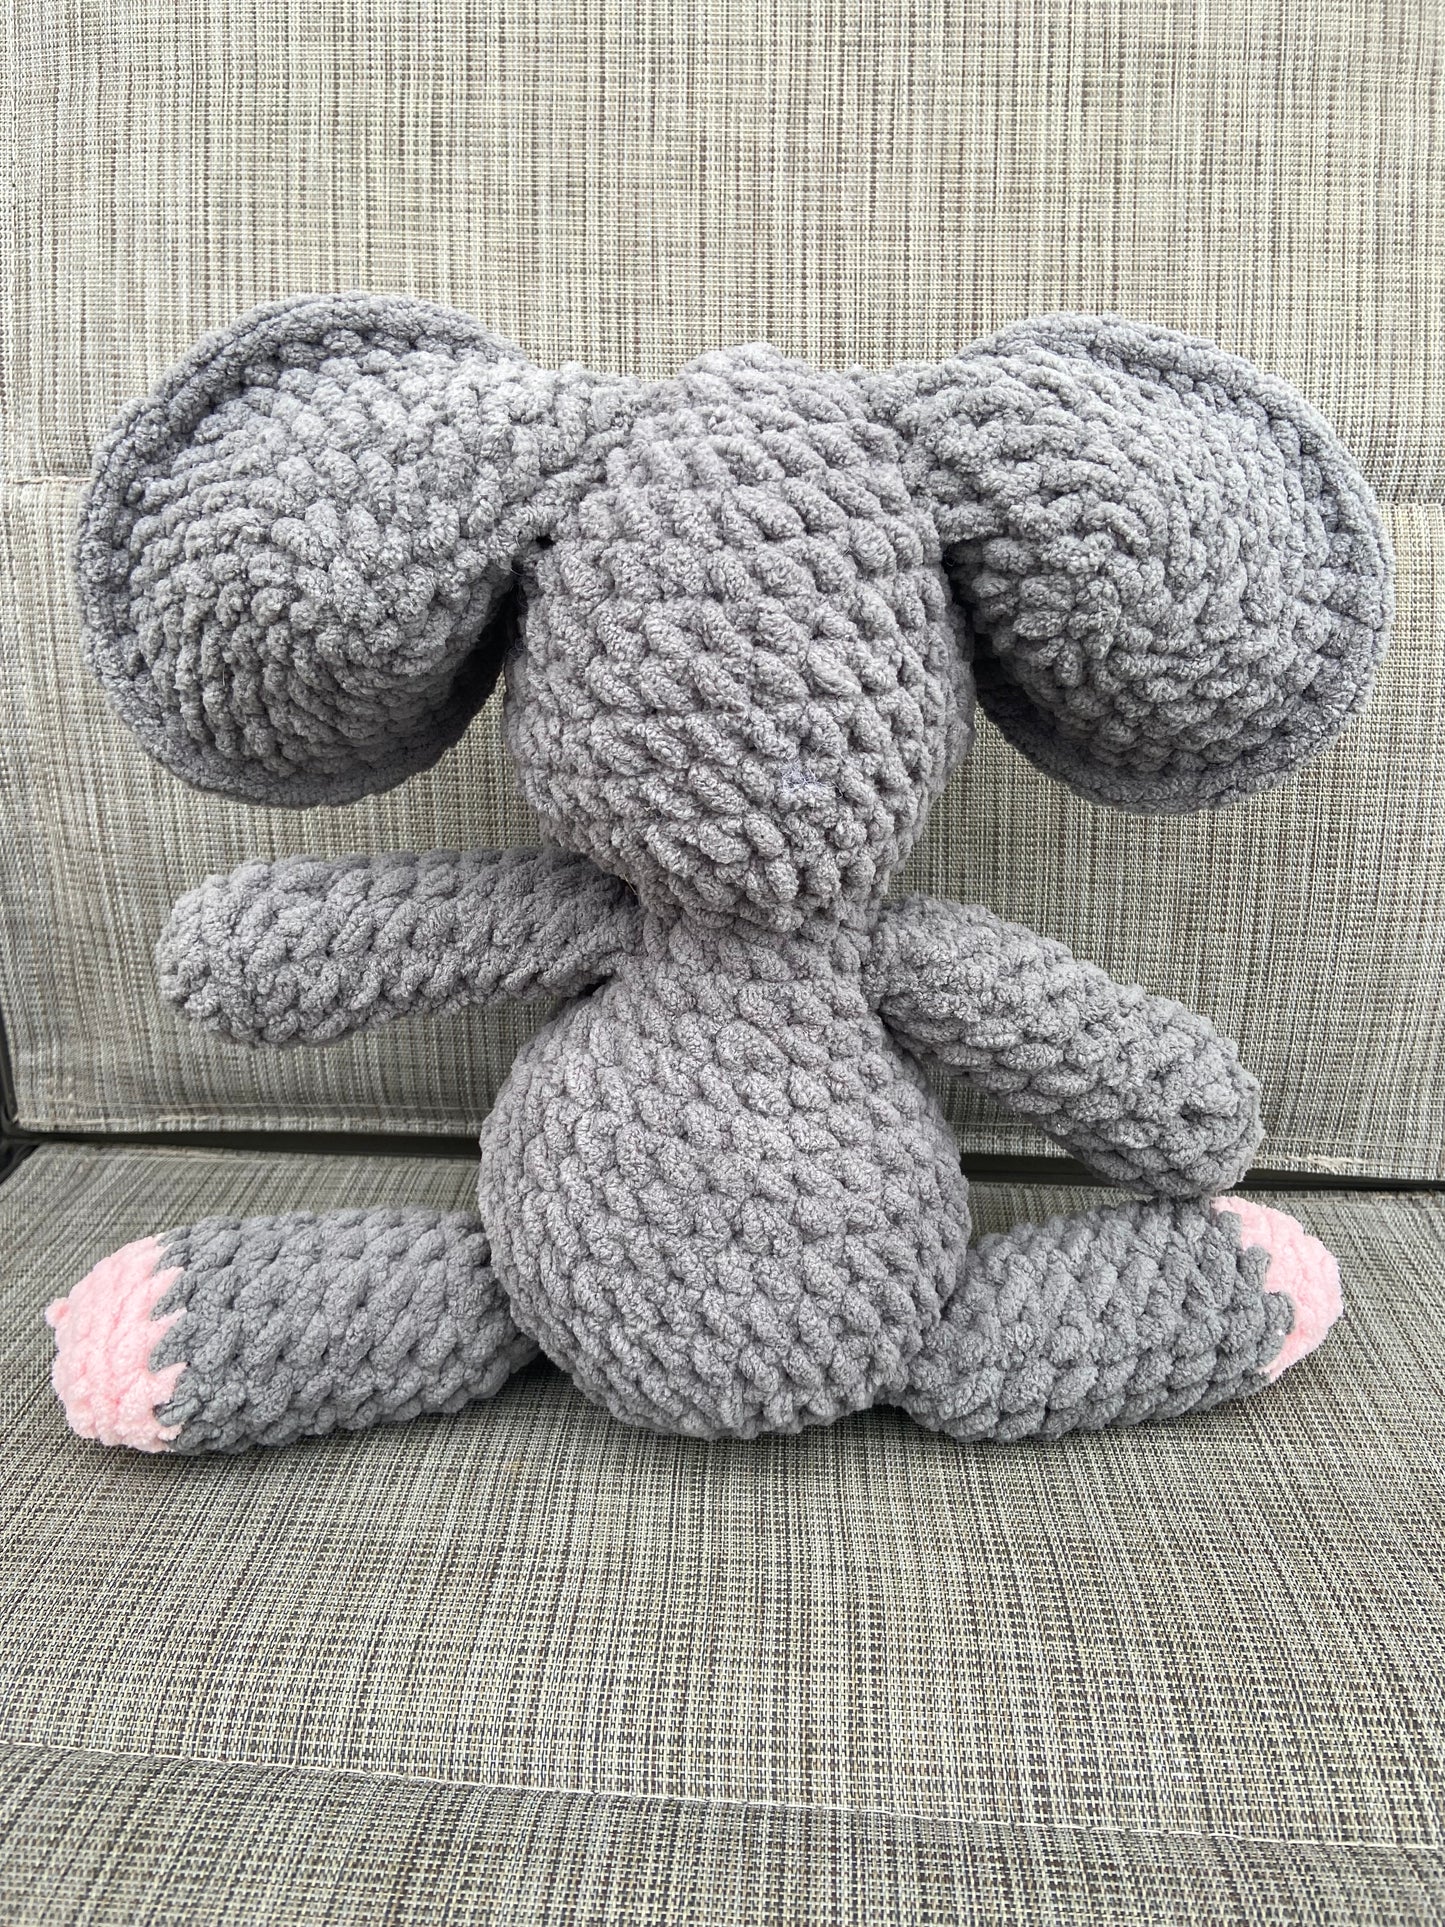 Handmade Crochet Elephant: Adorable and Soft Plush Toy for Kids